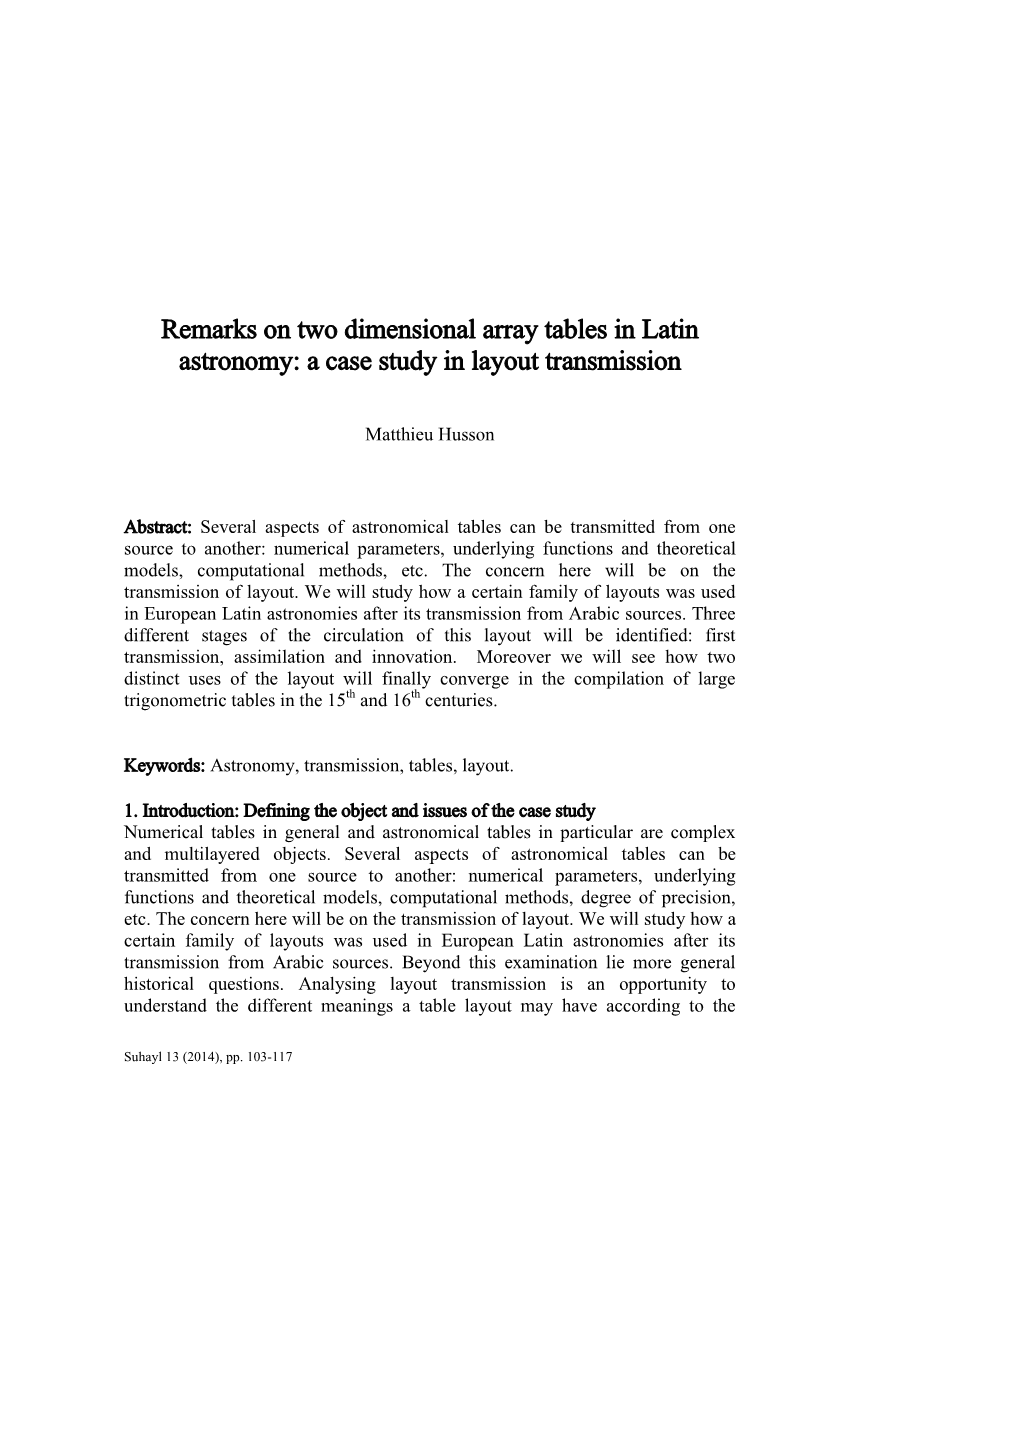 Remarks on Two Dimensional Array Tables in Latin Astronomy: a Case Study in Layout Transmission